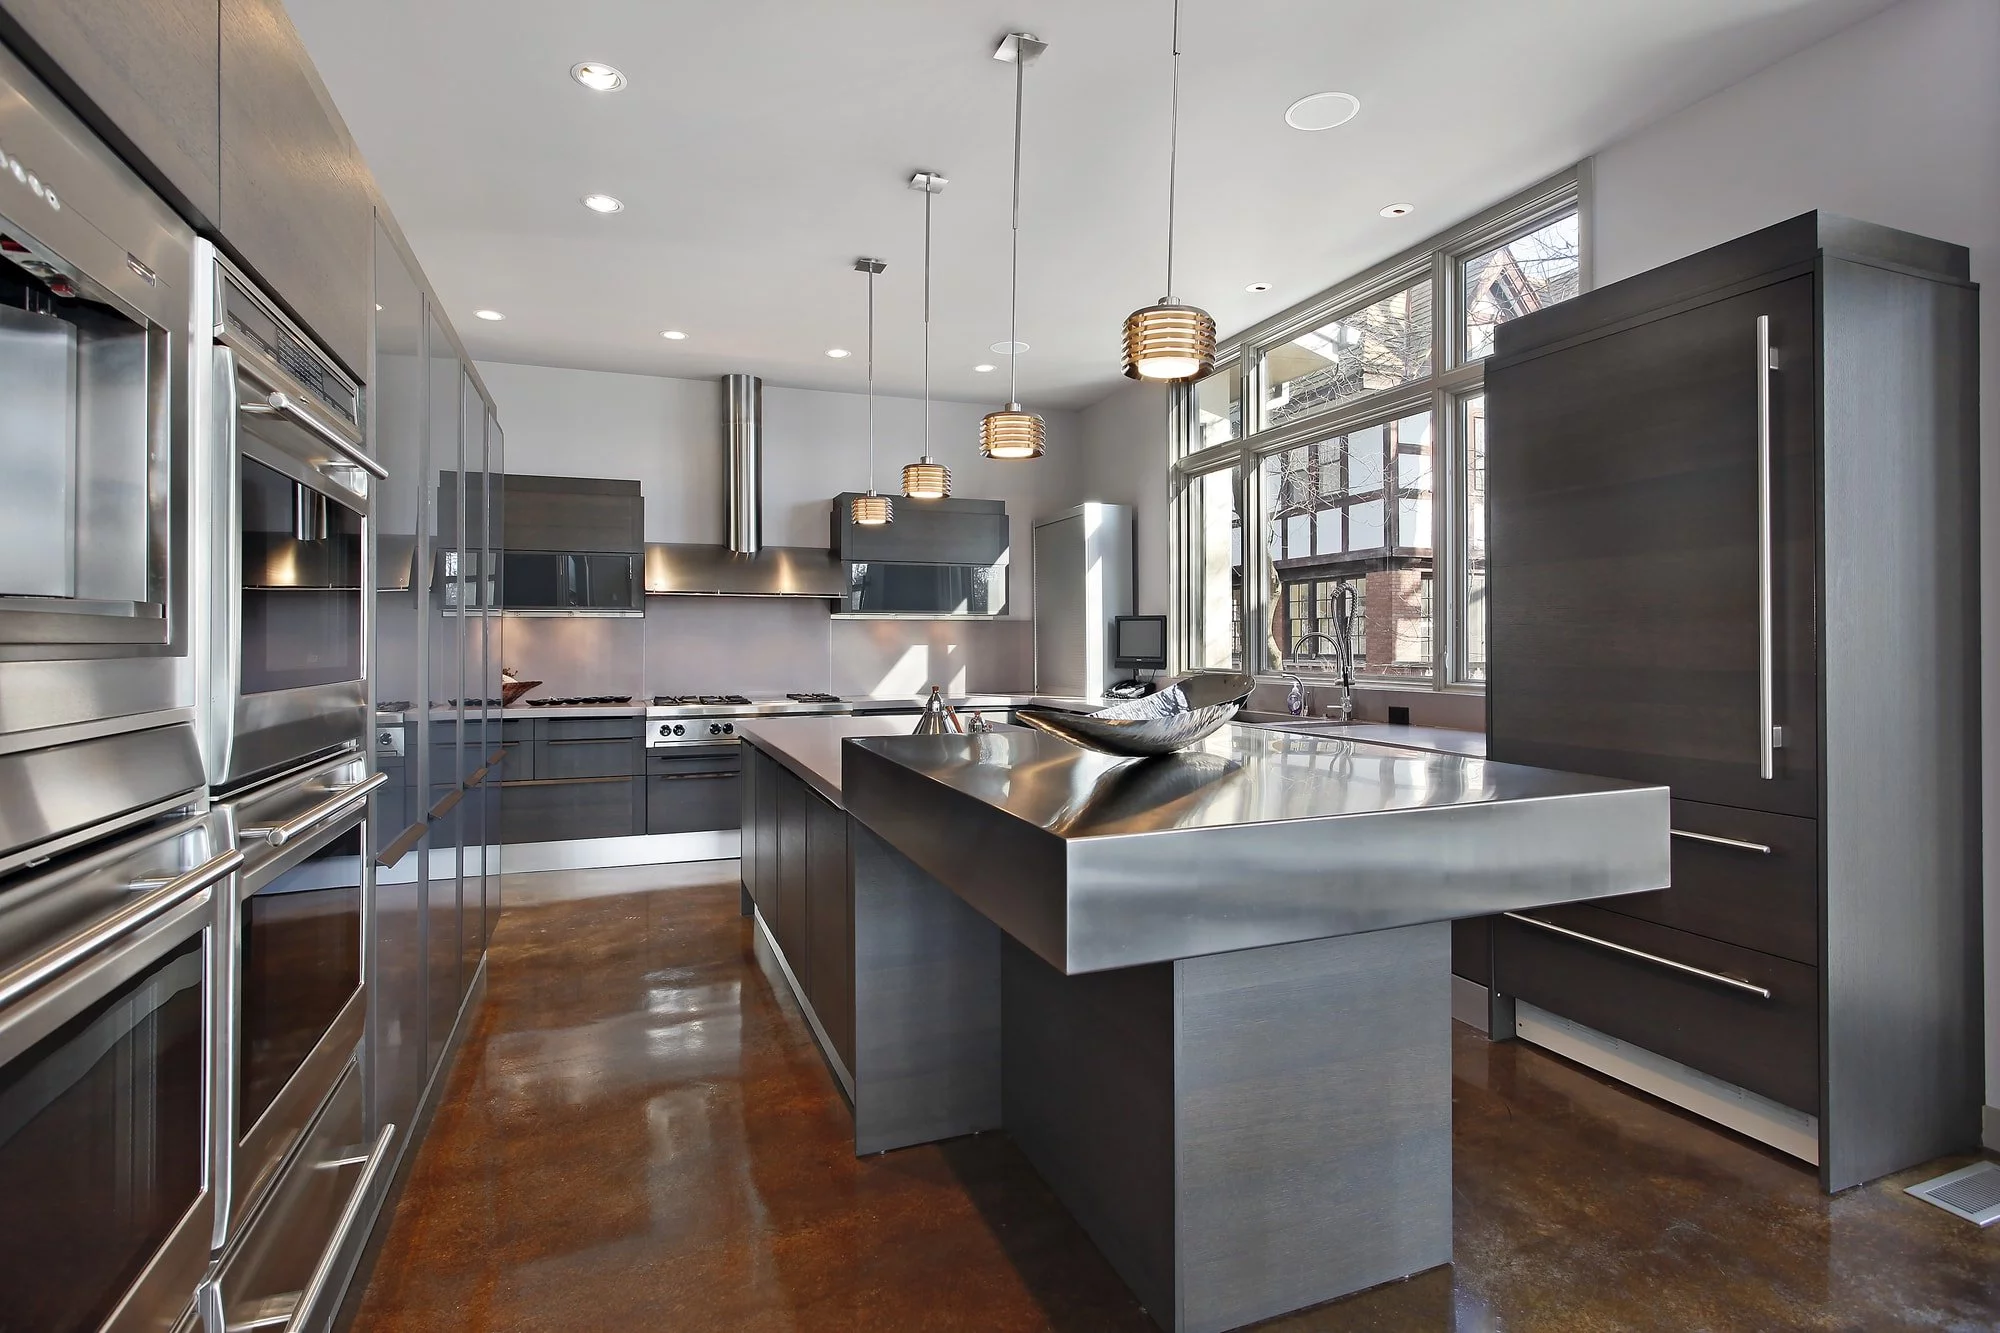 Let’s Get Cooking: How to Choose the Right Appliances for Your Kitchen Remodel